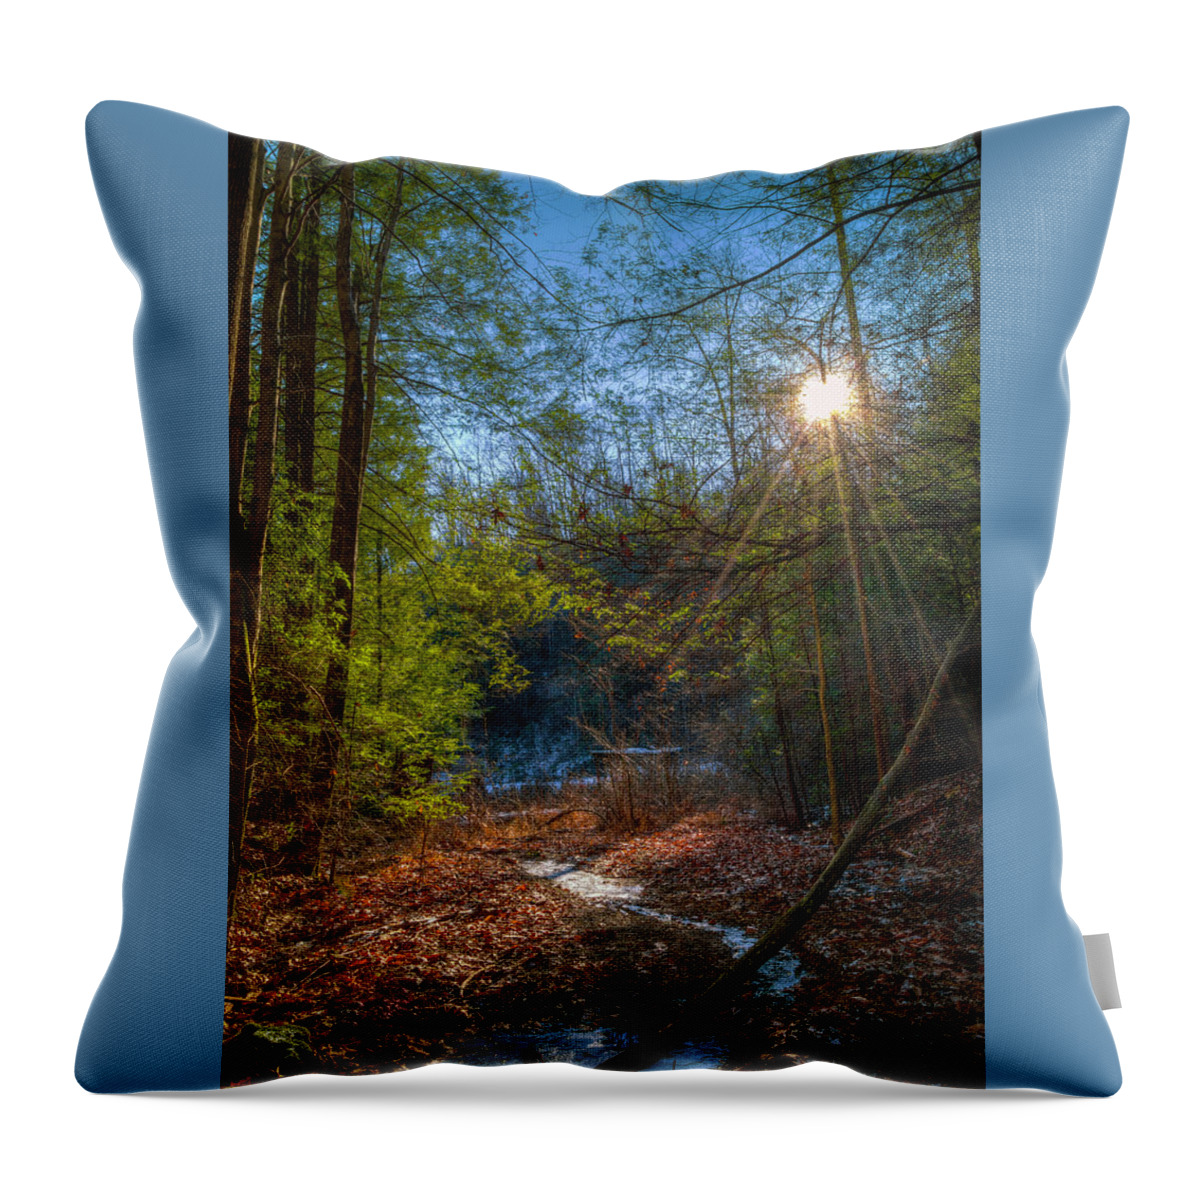 Sun Throw Pillow featuring the photograph Sunshine by Lena Auxier